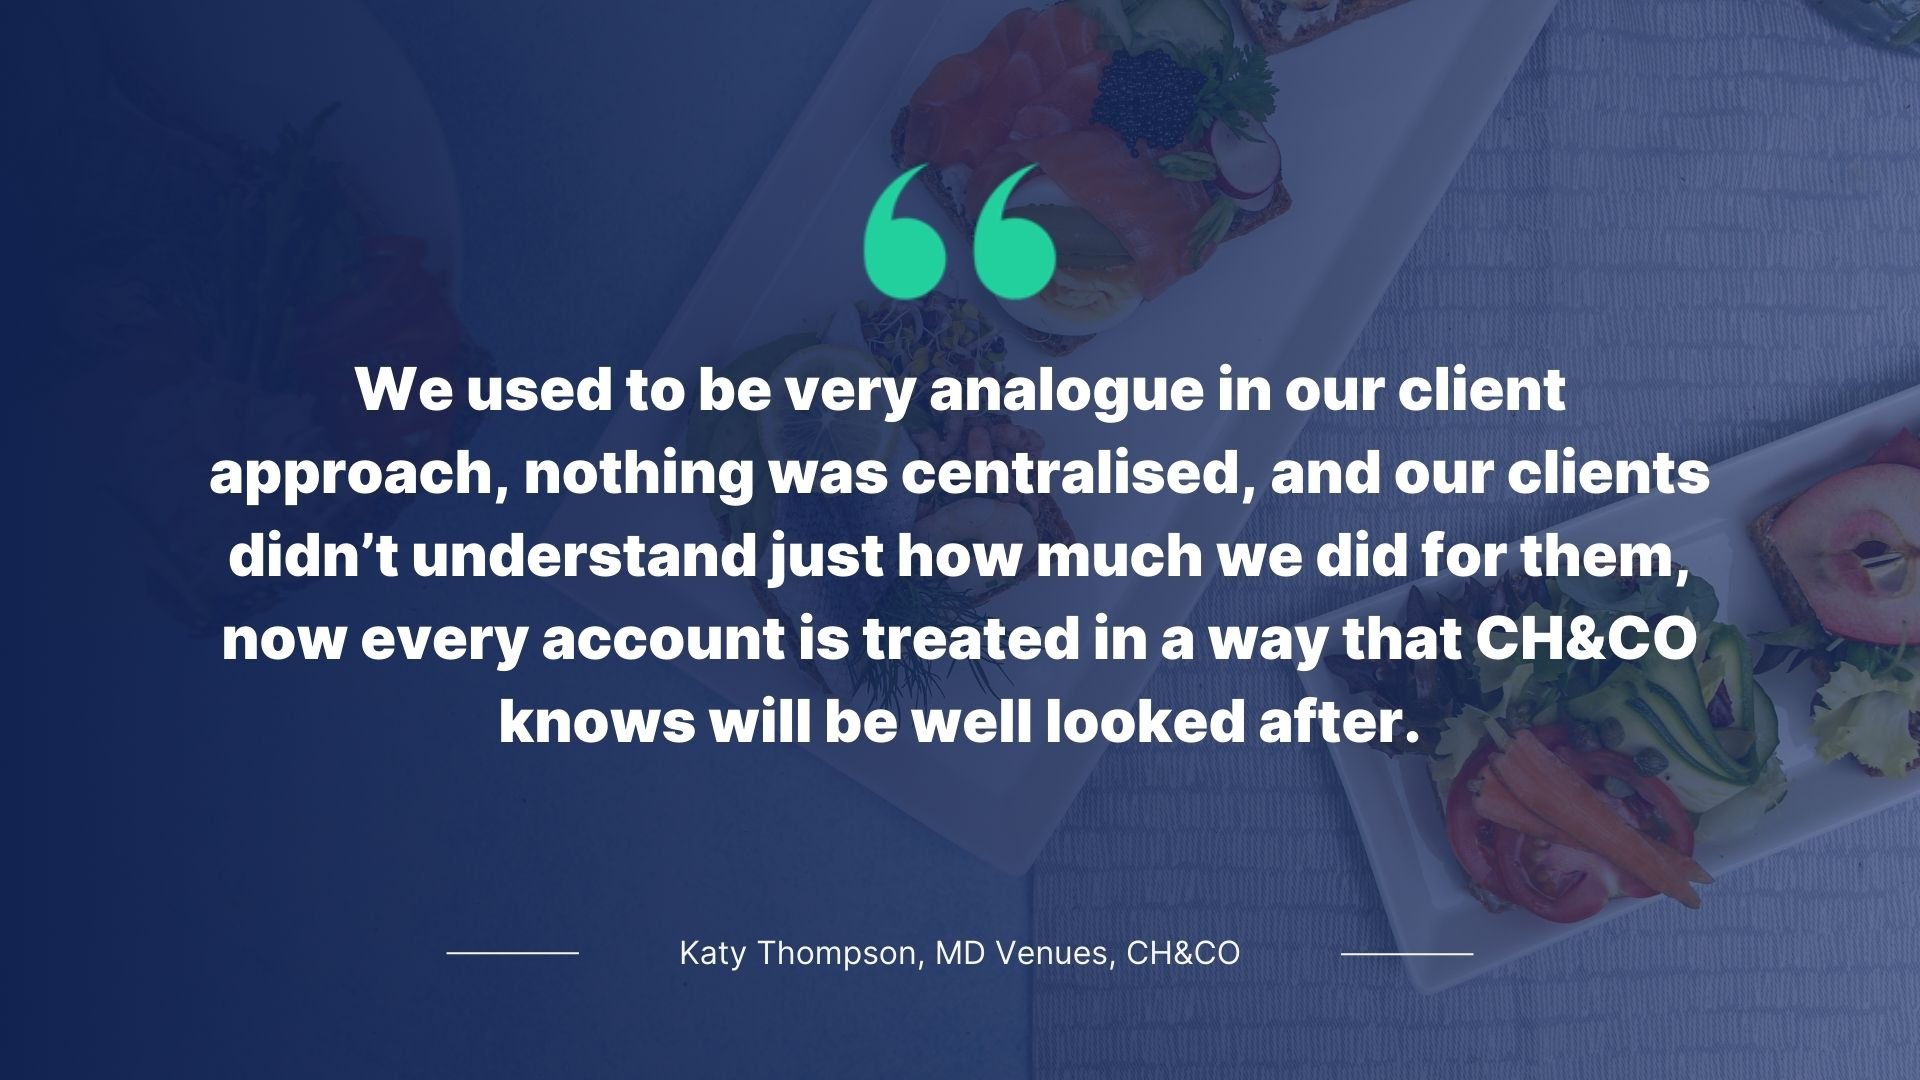 Quote by Katy Thompson, MD Venues, CH&CO: We used to be very analogue in our client approach, nothing was centralised, and our clients didn't understand just how much we did for them, now every account is treated in a way that CH&CO knows will be well looked after.